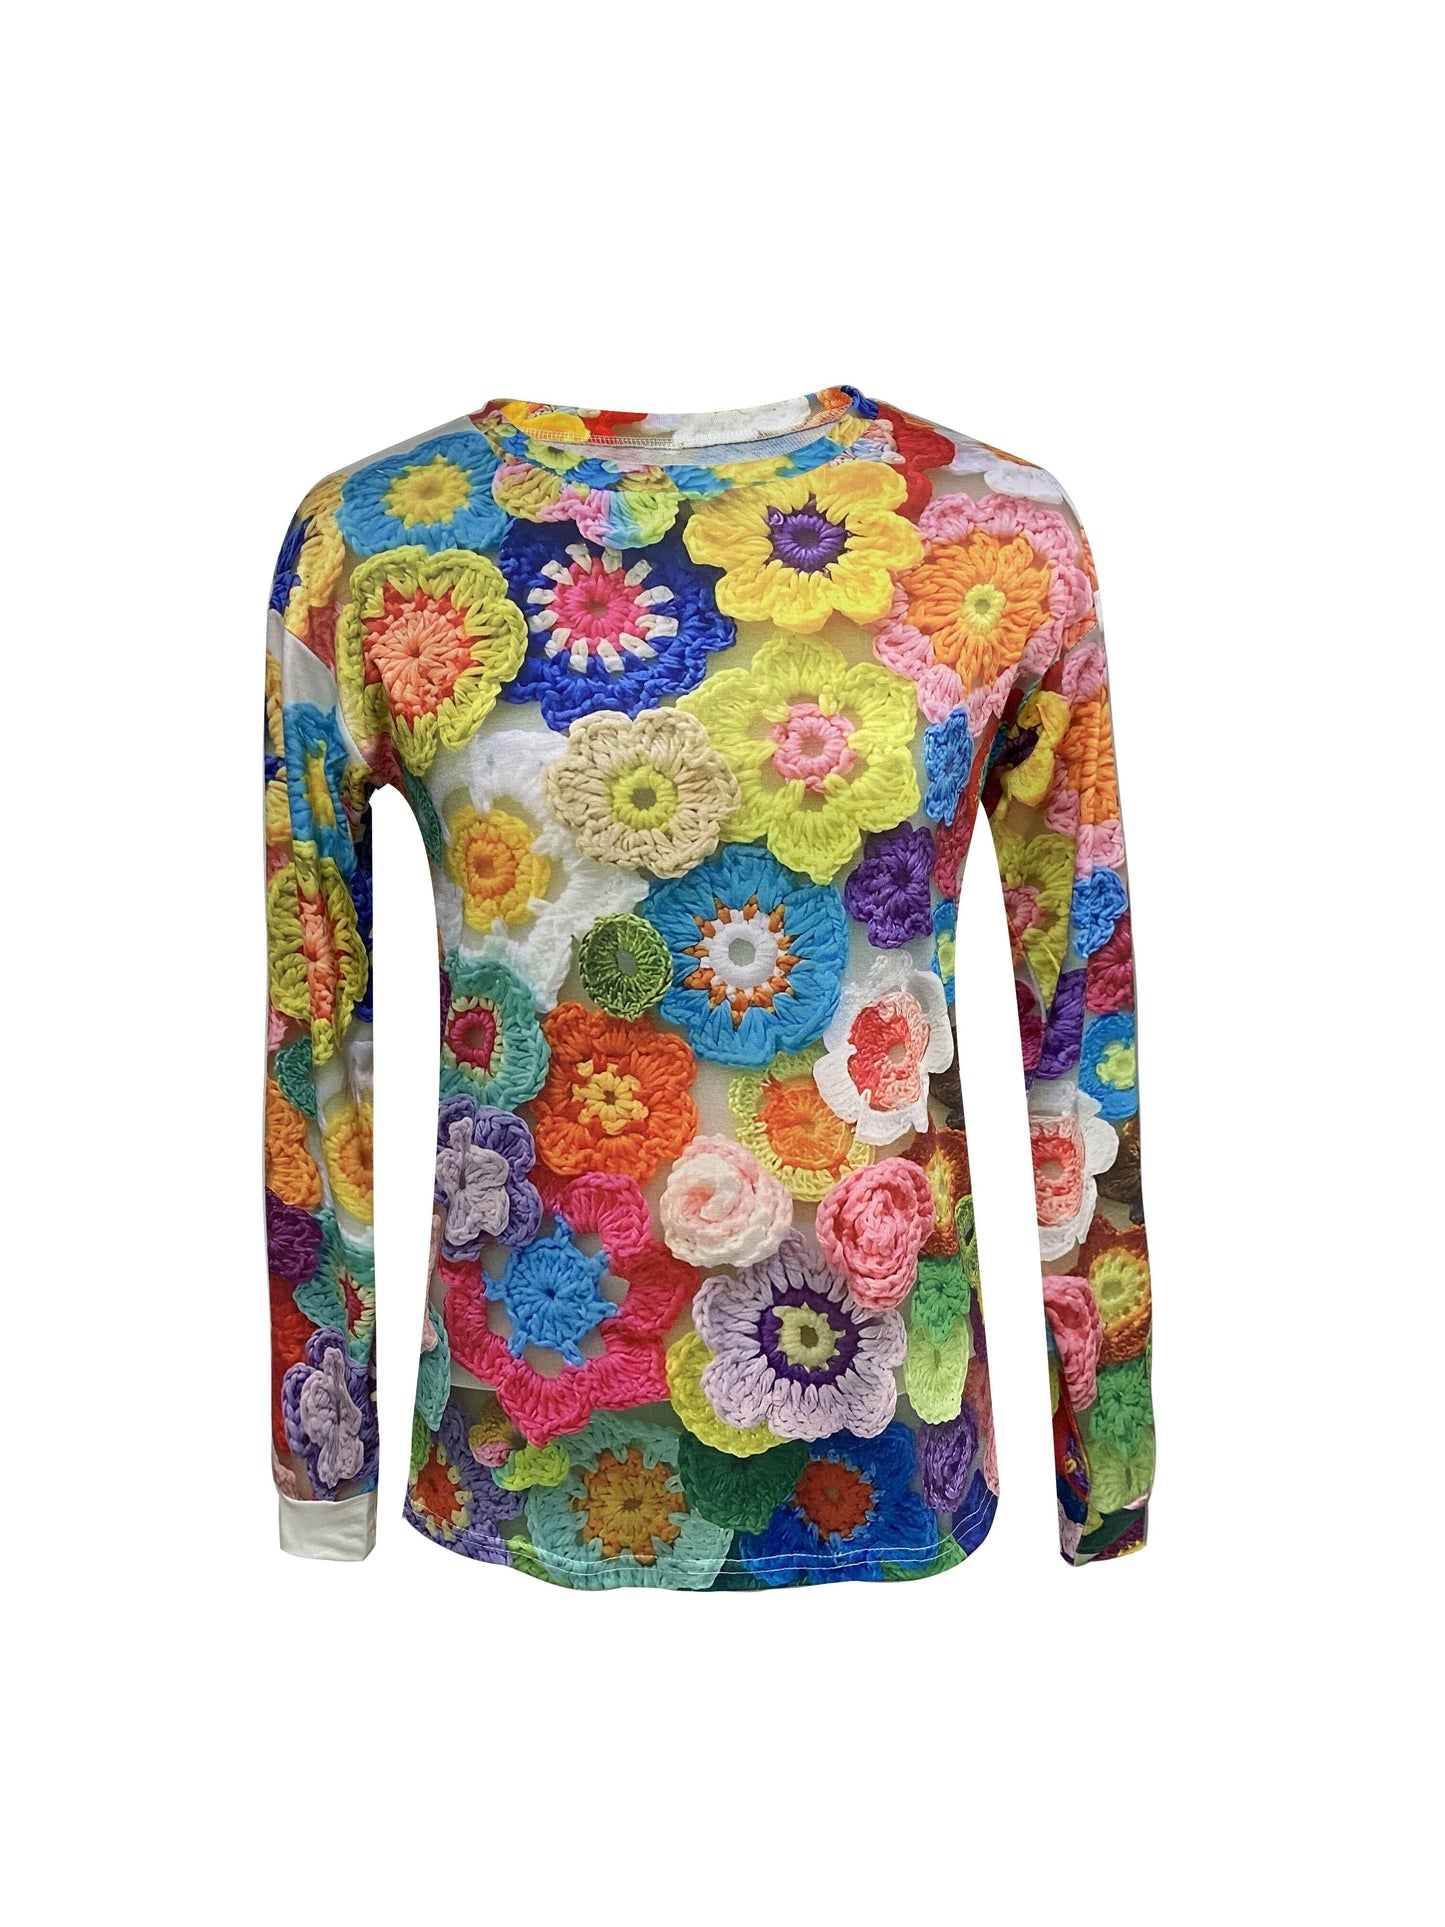 Floral Pattern Crew Neck T-Shirt, Casual Long Sleeve Top For Spring & Fall, Women's Clothing